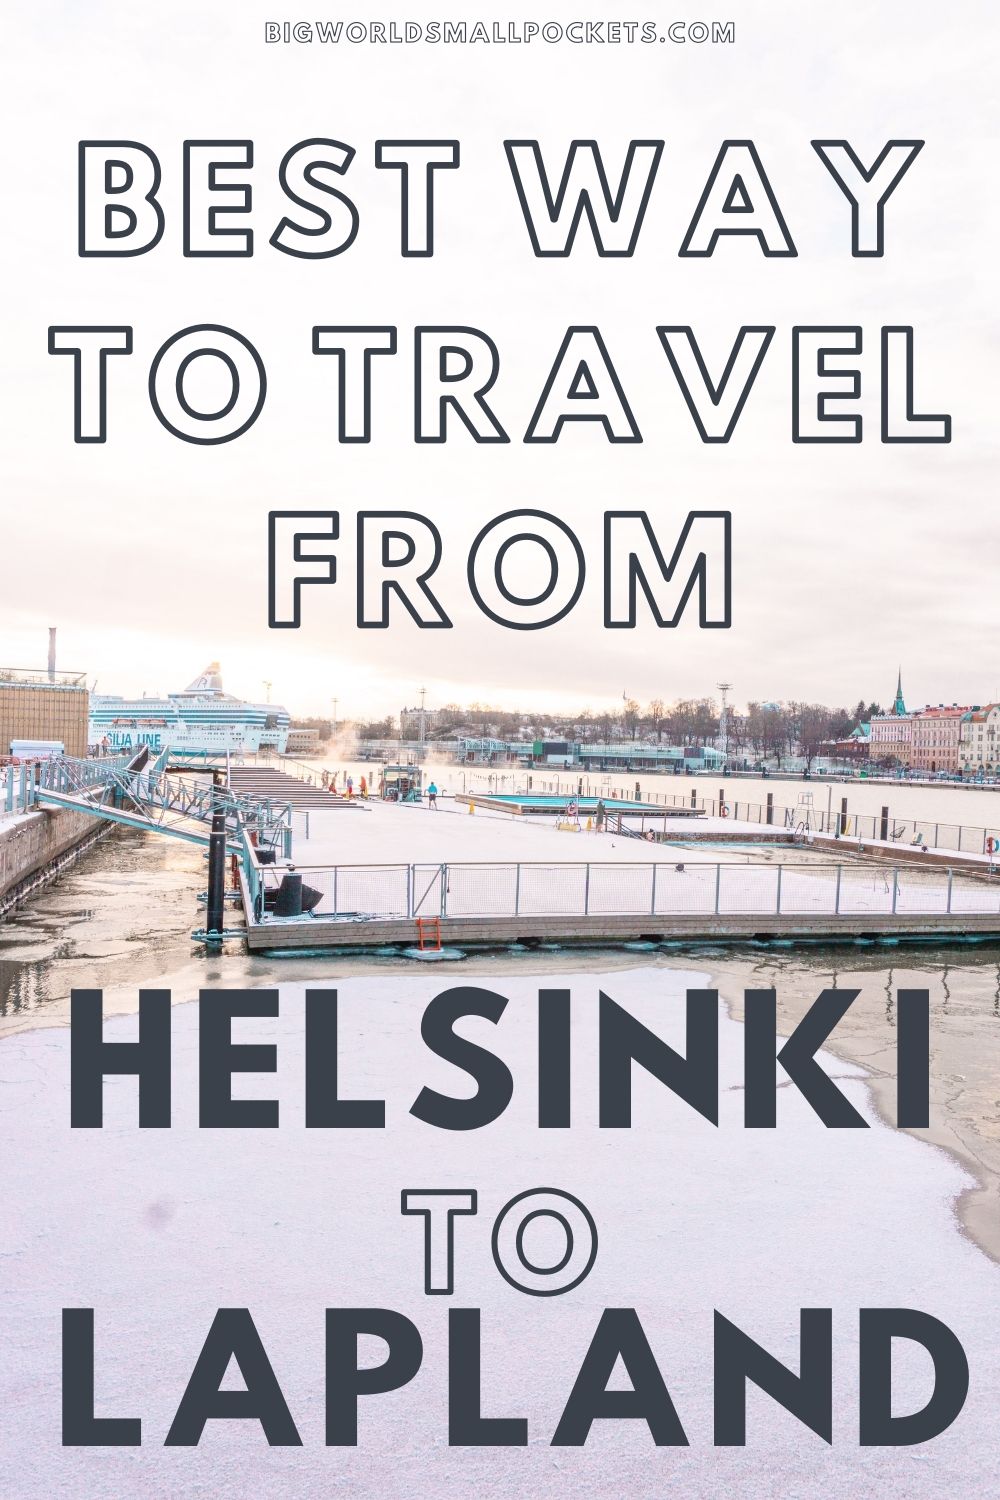 The Best Way to Travel from Helsinki to Lapland